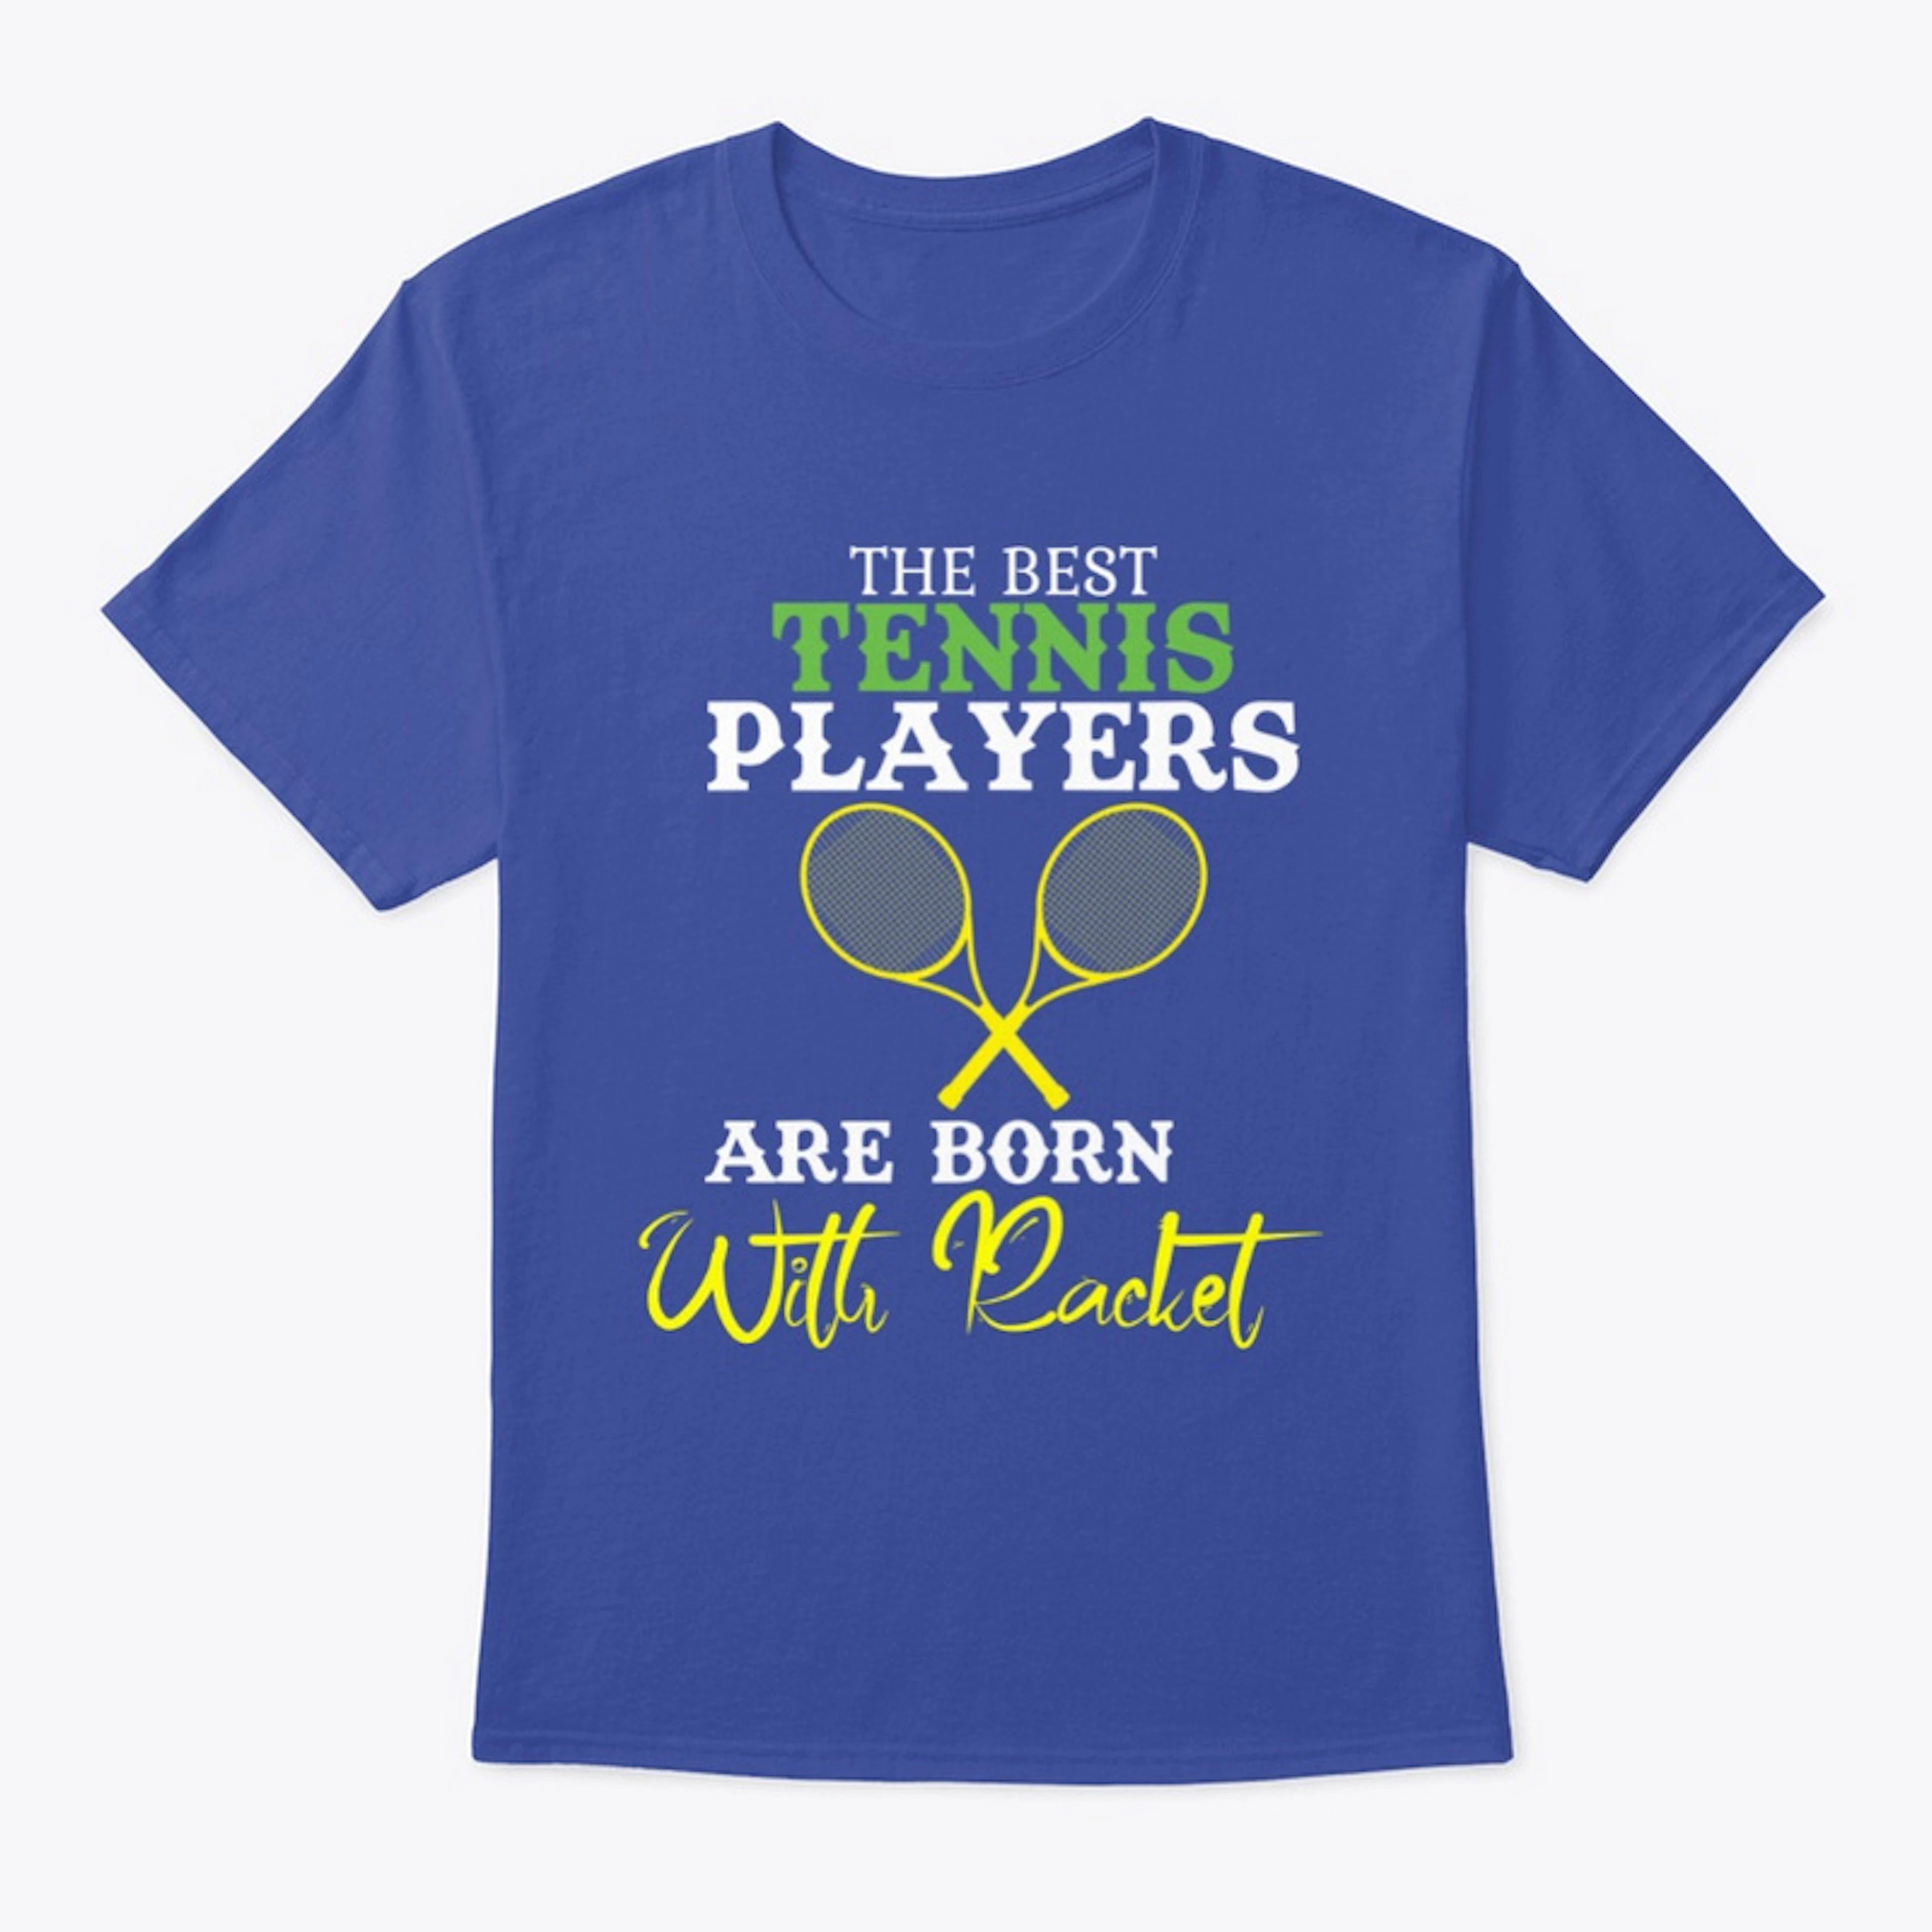 LIMITED EDTIONS|THE BEST TENNIS PLAYERS